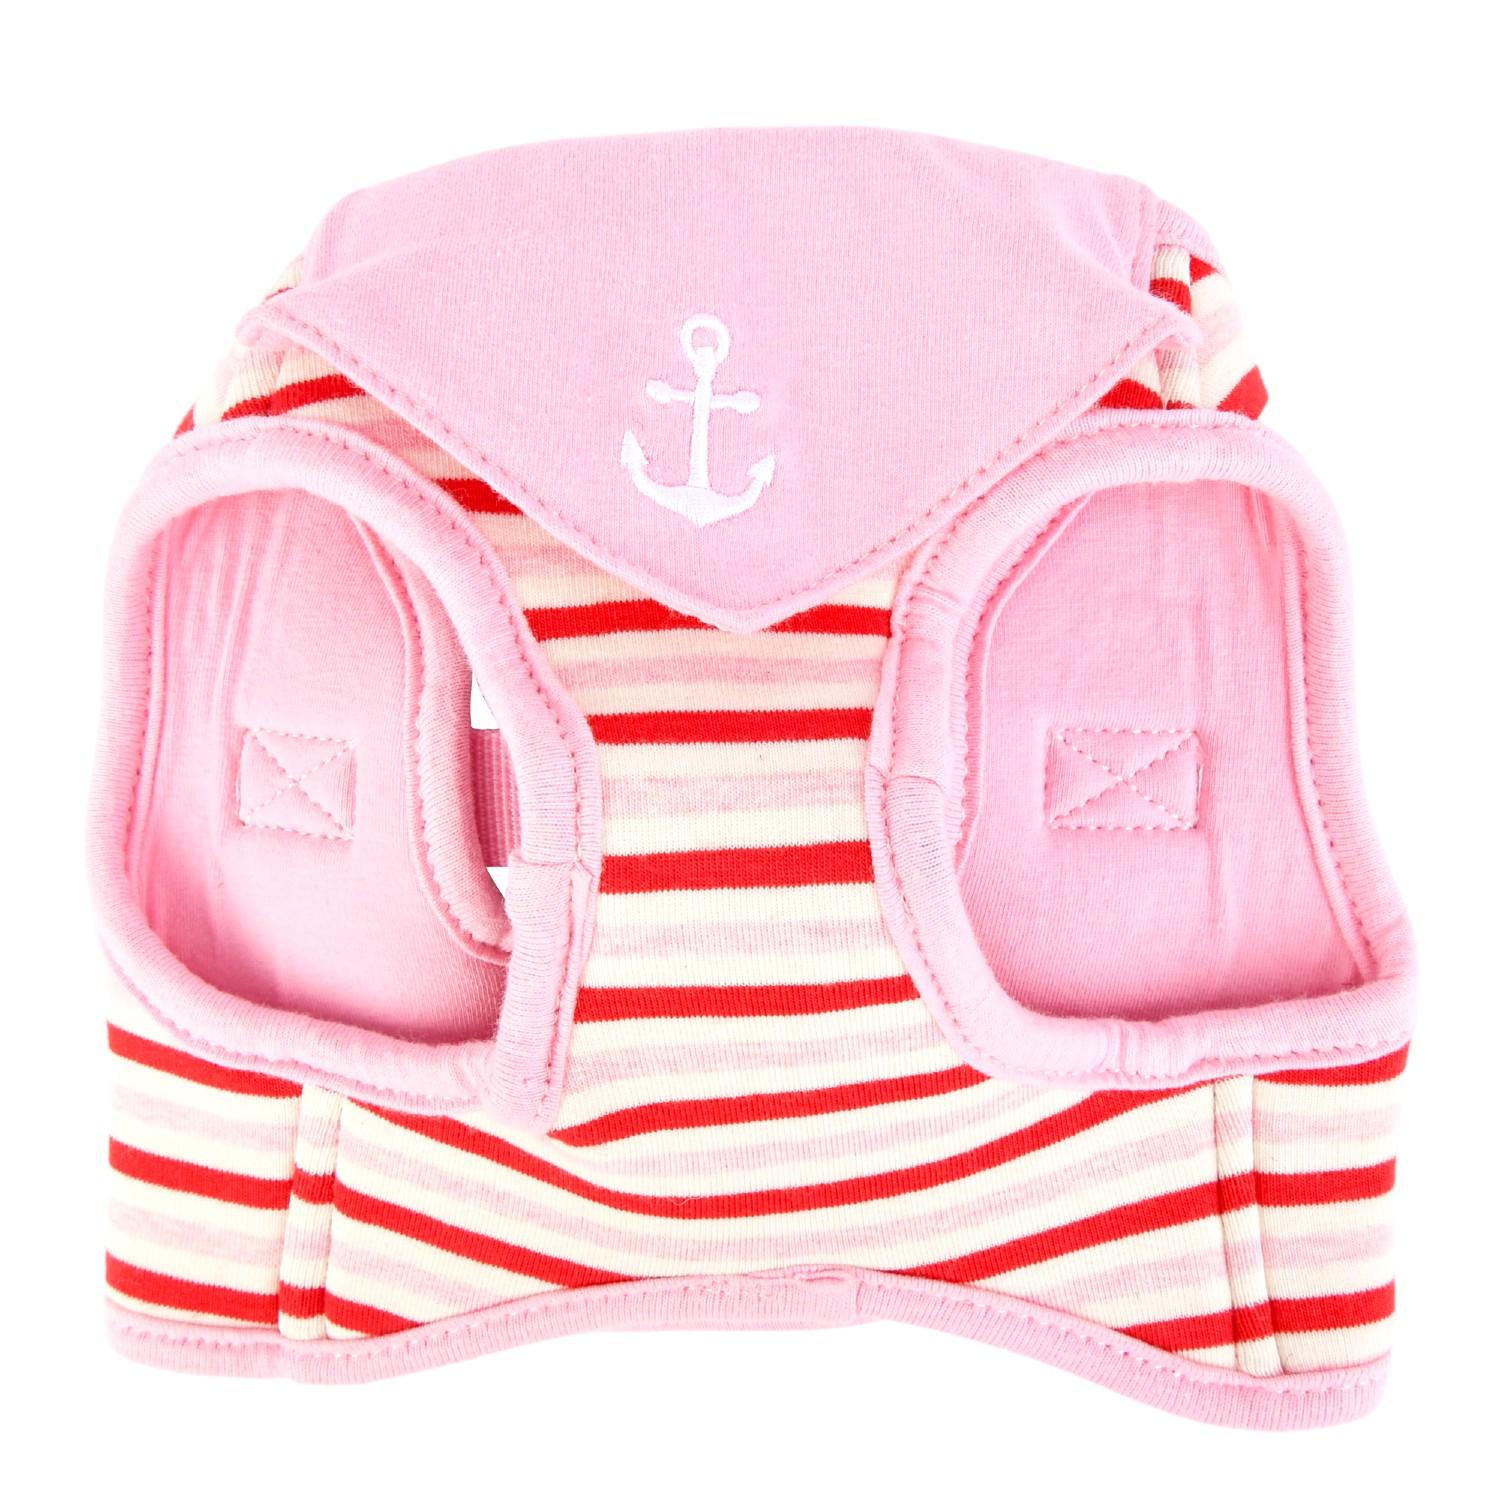 Seaman Vest Dog Harness by Puppia - Pink